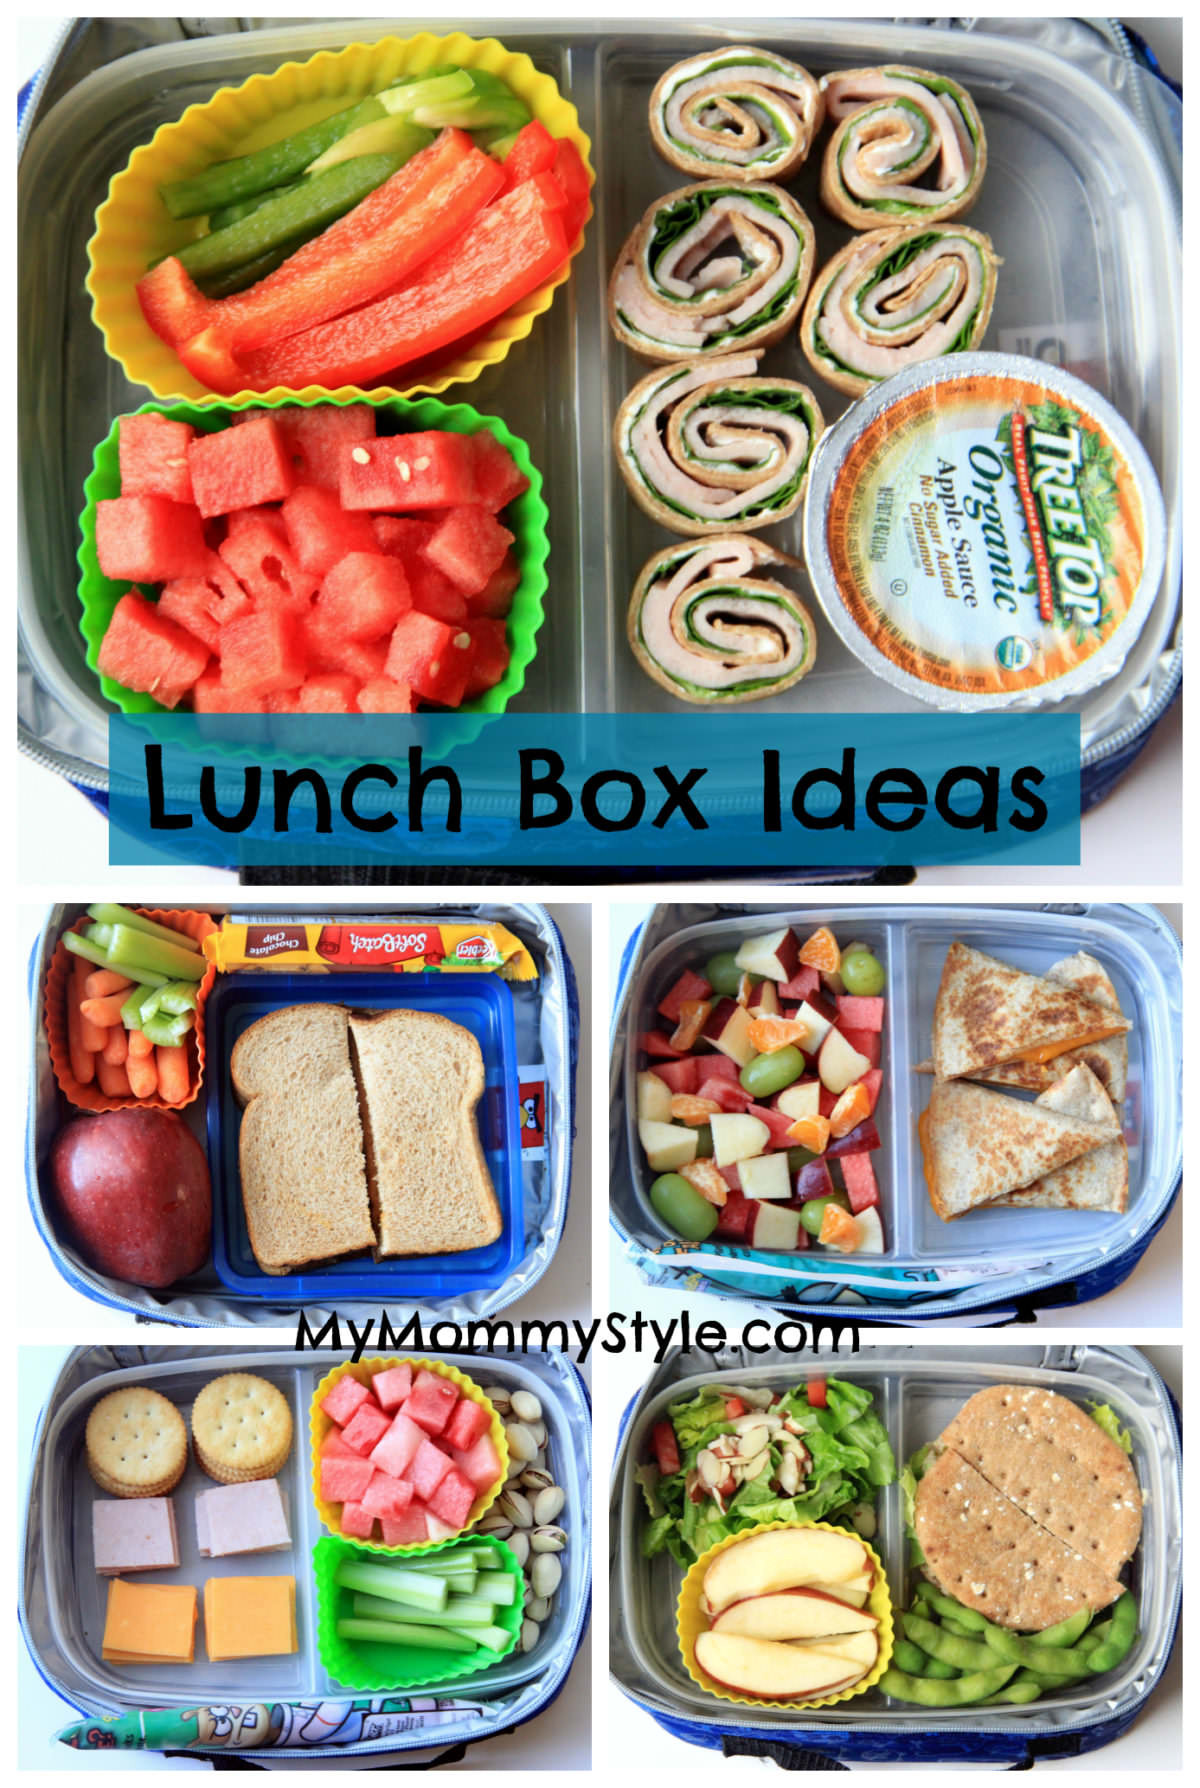 Healthy Lunch Snacks For Kids
 The best after school snacks for kids My Mommy Style